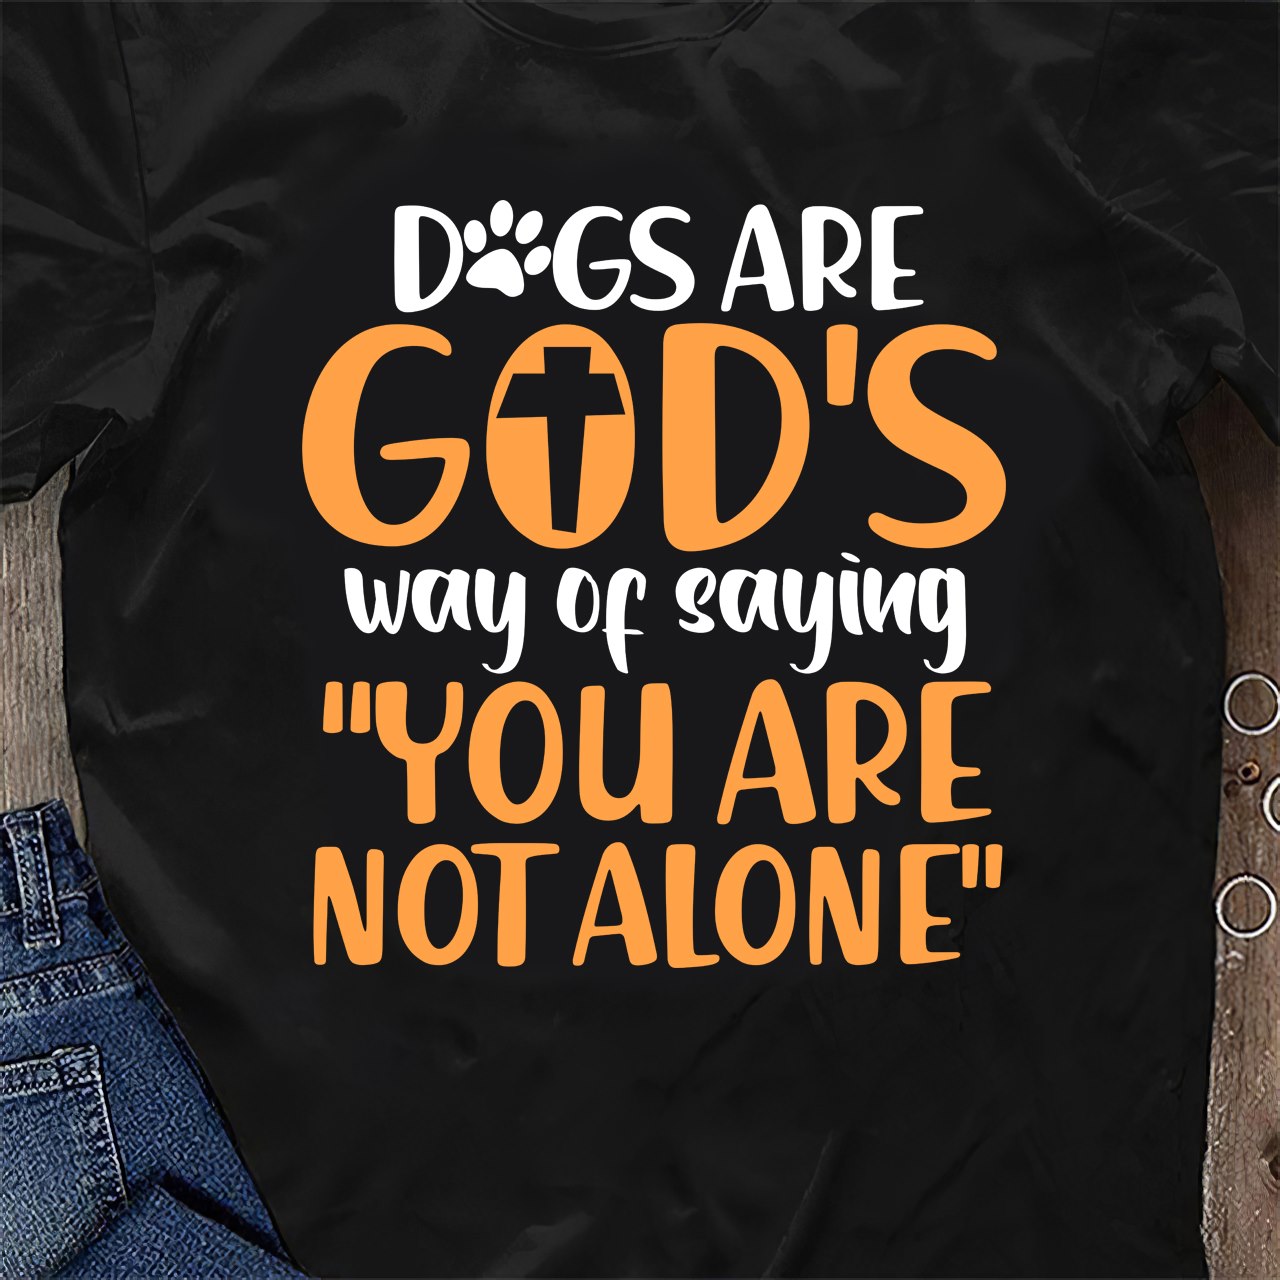 Dog are god's way of saying you are not alone